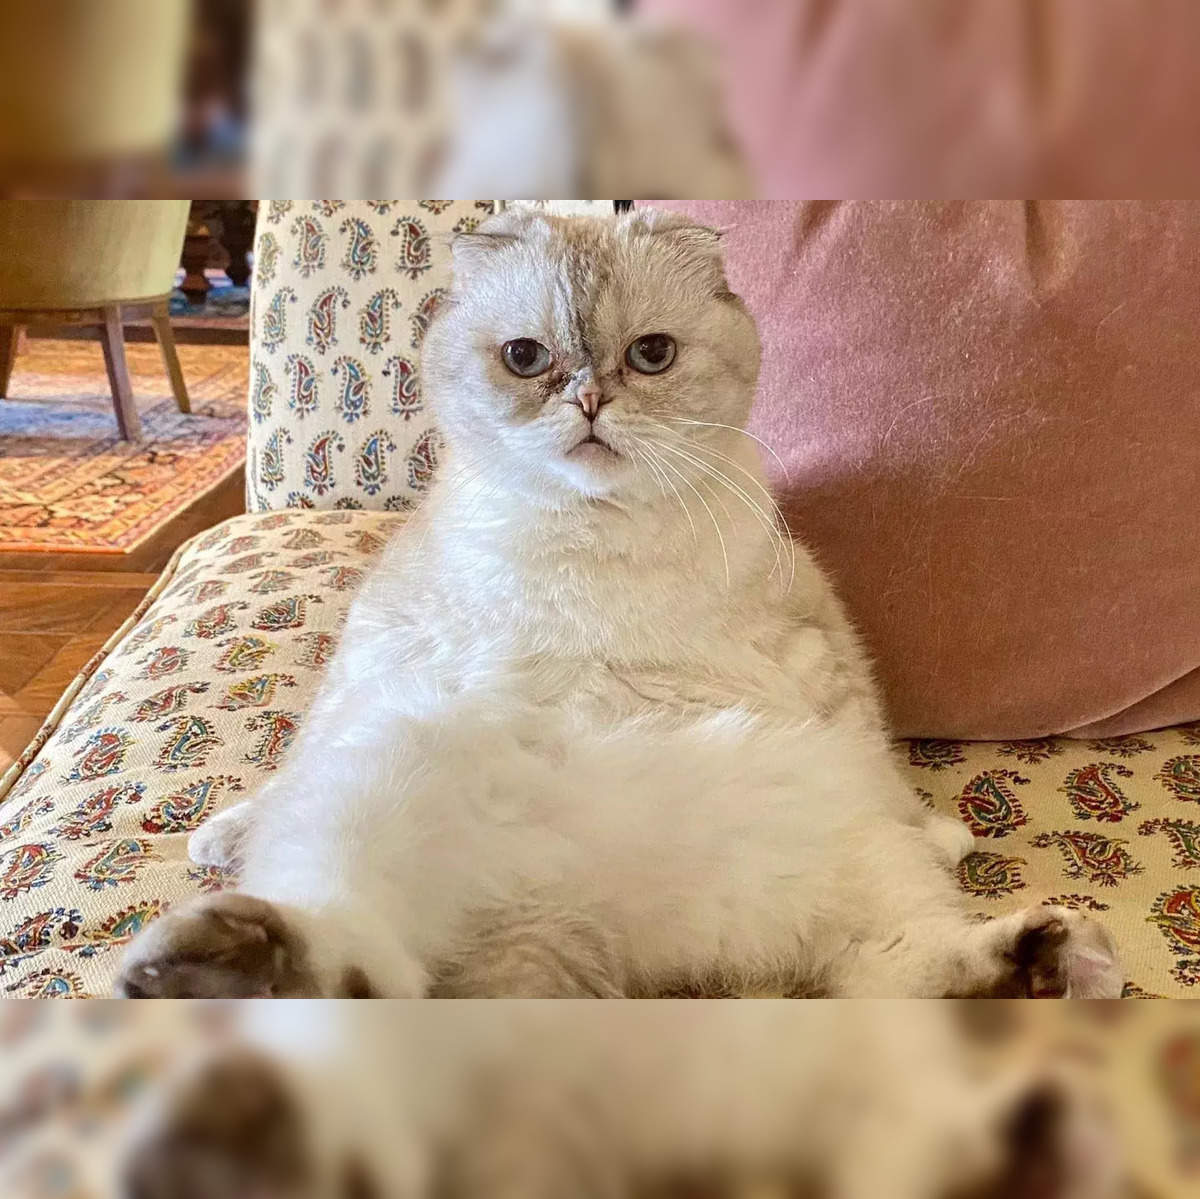 https://img.etimg.com/thumb/width-1200,height-1200,imgsize-271324,resizemode-75,msid-96771636/news/international/us/taylor-swifts-cat-becomes-worlds-3rd-wealthiest-pet-with-net-worth-of-97-million-know-whos-richer-than-olivia-benson.jpg